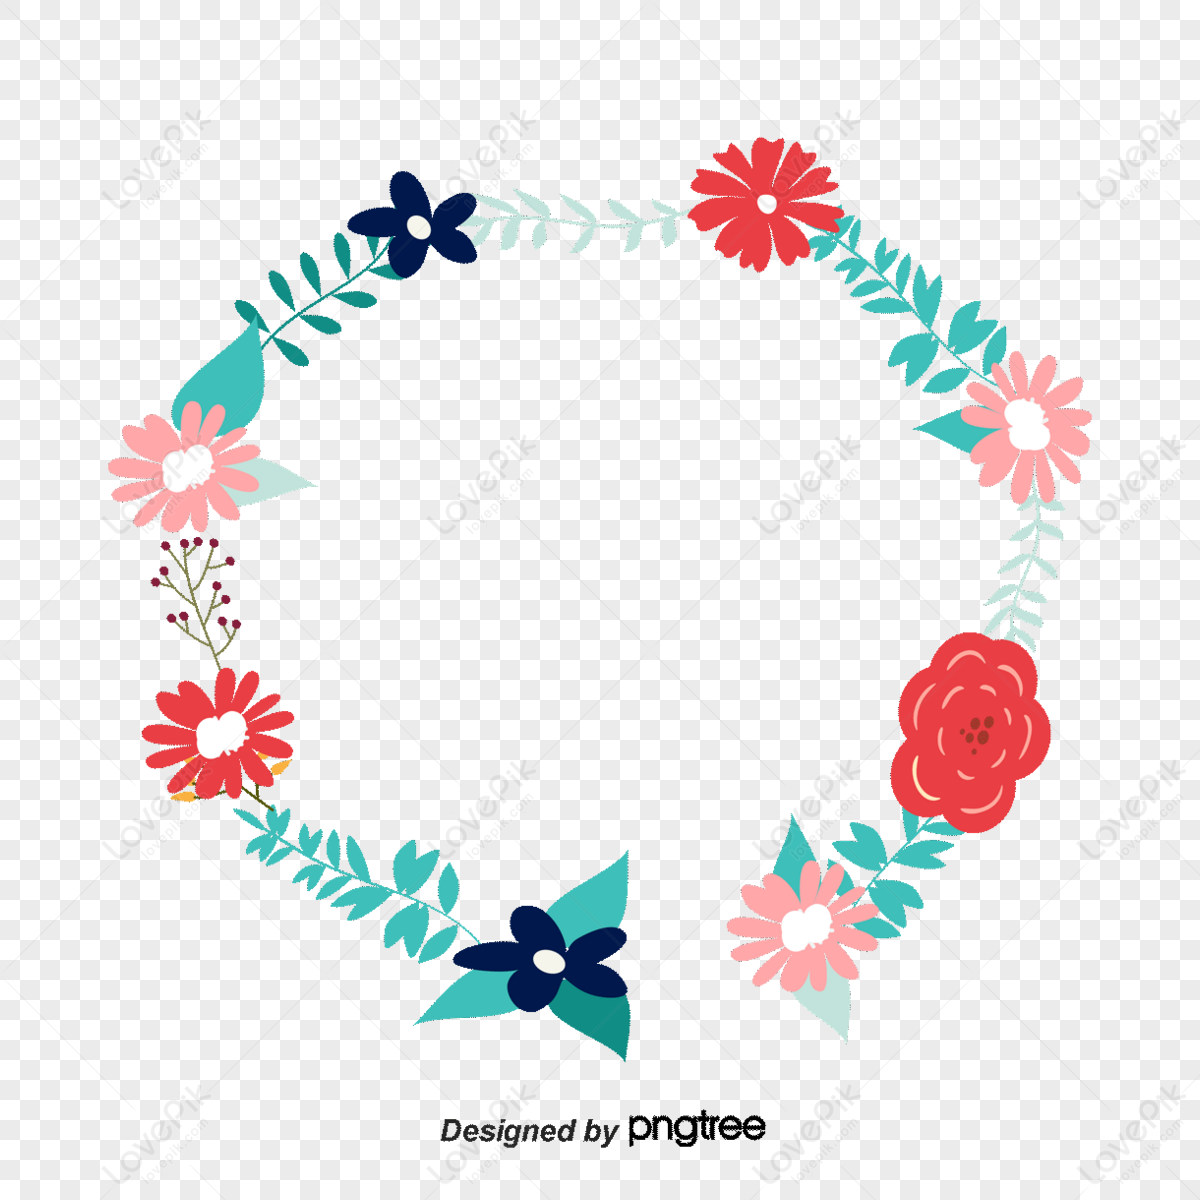 Colorful Flower Frame PNG Images With Transparent Background | Free ...